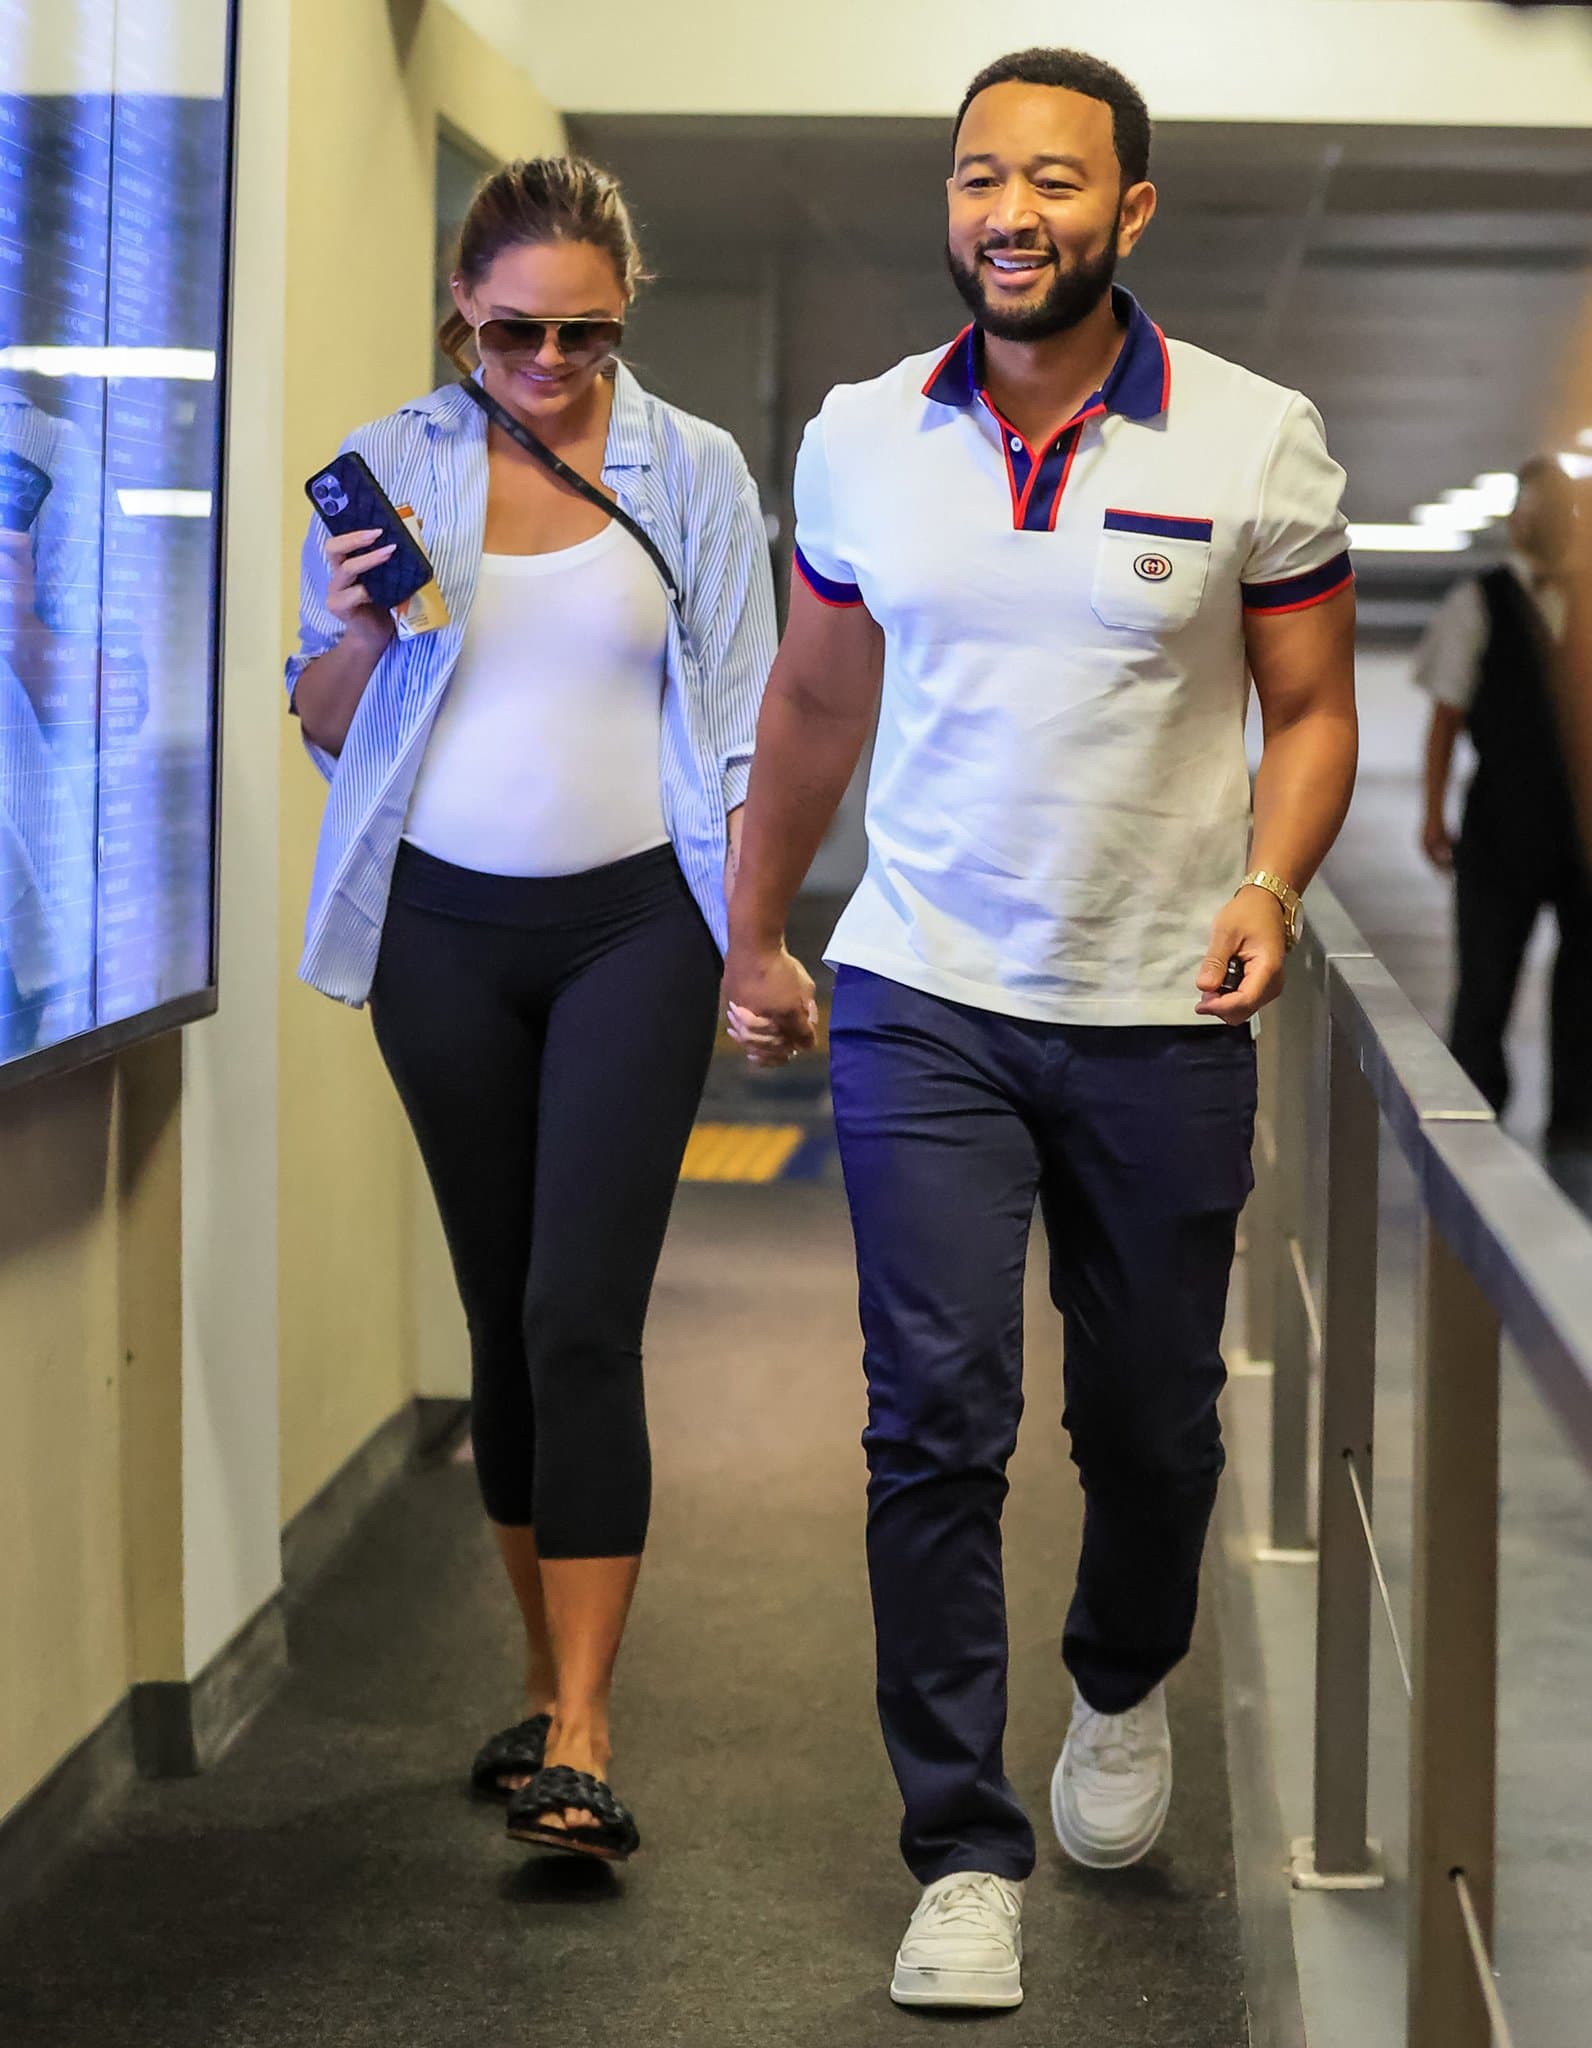 Pregnant Chrissy Teigen shows off her growing baby bump in a fitted white top, black leggings, and unbuttoned light blue shirt